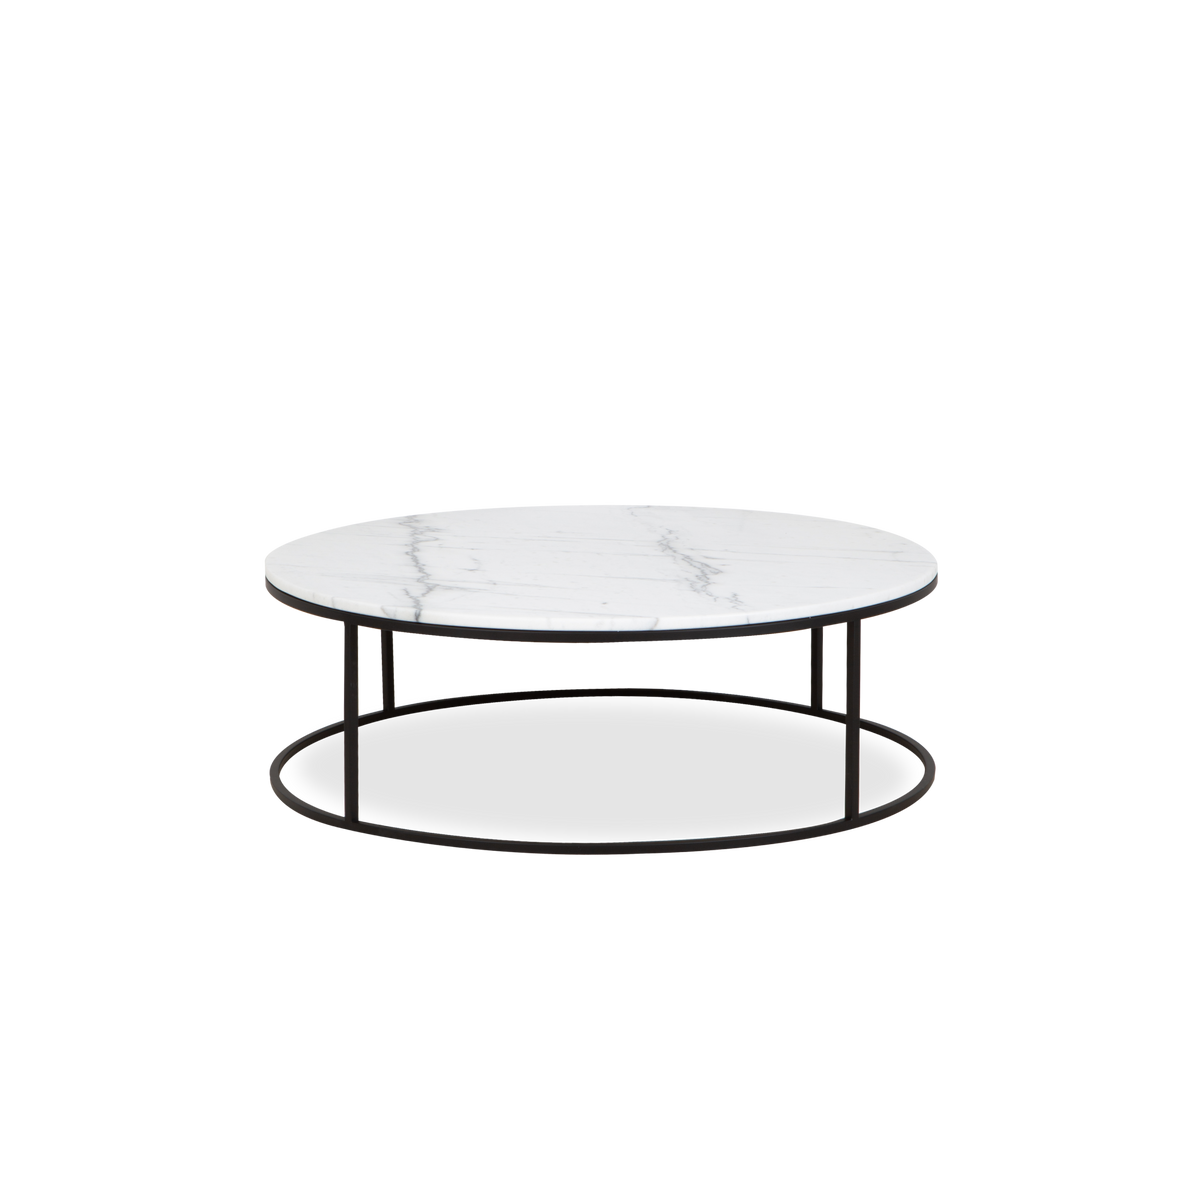 The timeless elegance of white marble makes this coffee table a stylish addition to your living space.